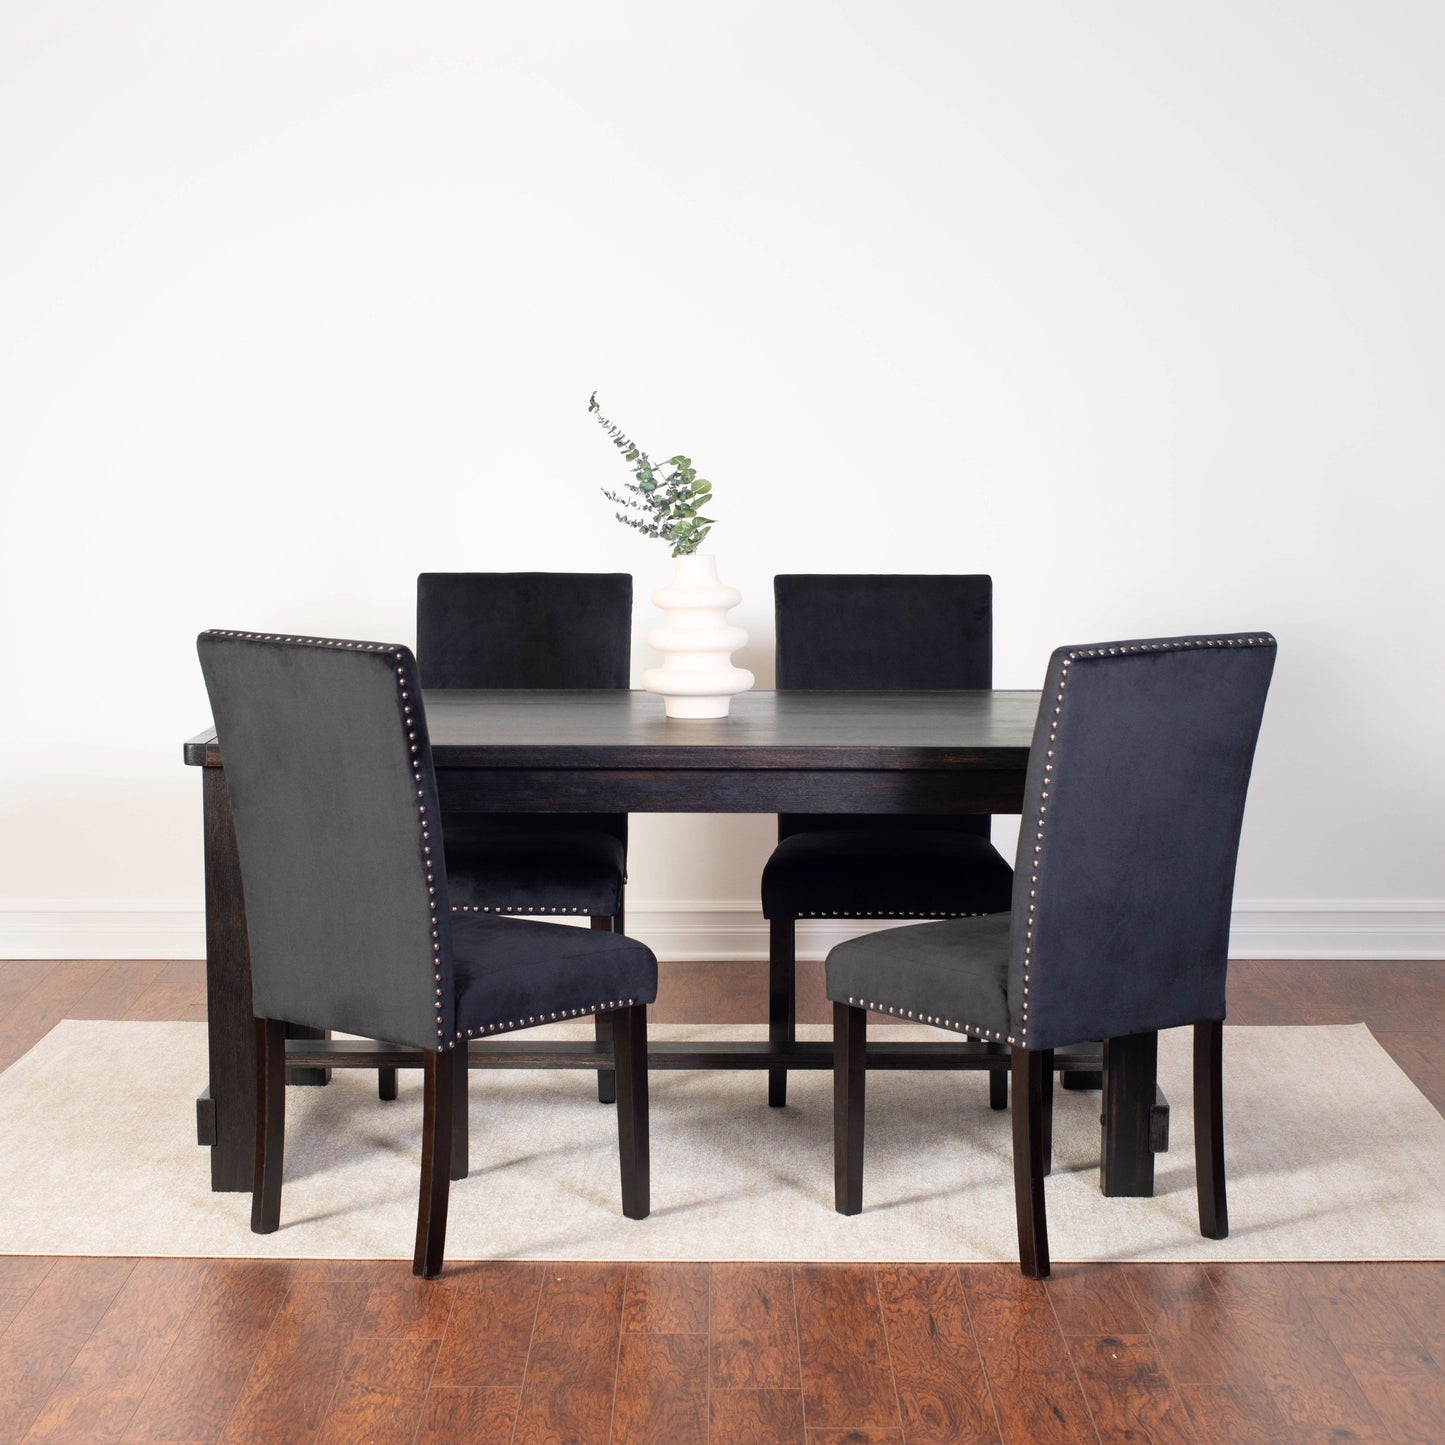 Vanzo Contemporary 5-Piece Dining Set, Dining Table with 4 Stylish Chairs